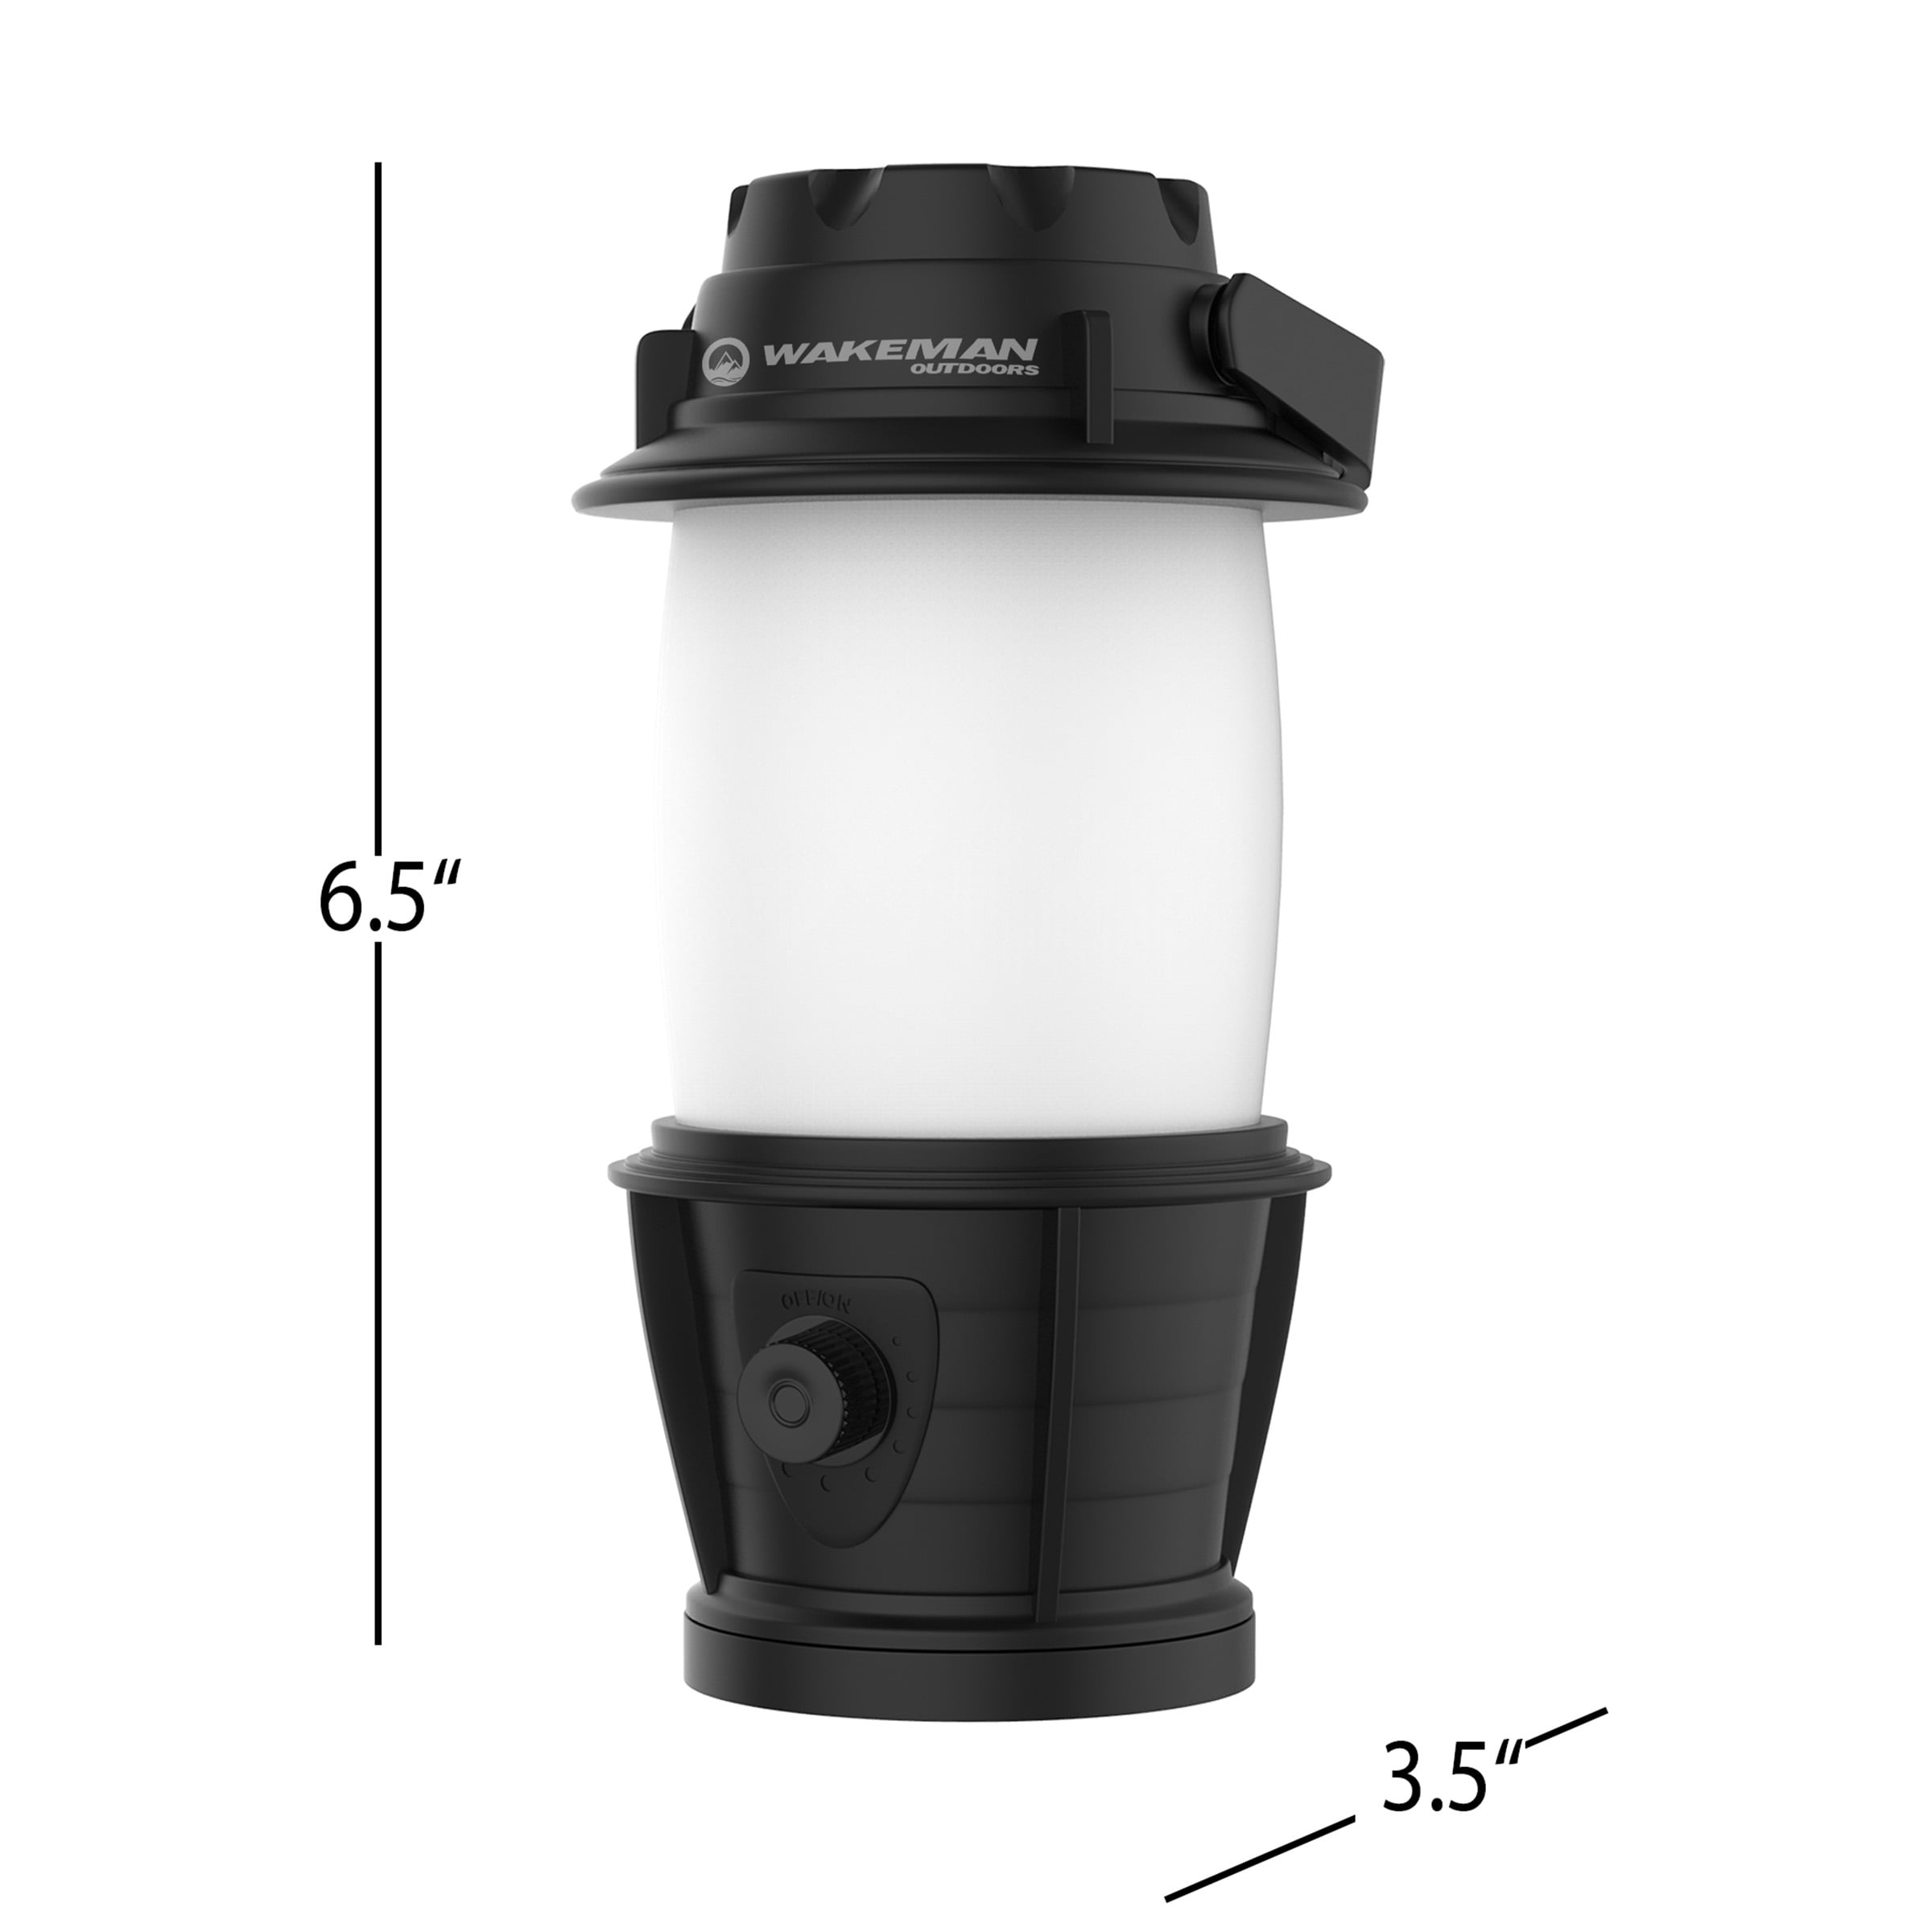 LED Pop Up Camping Lantern with a Flame Effect - Camping Lanterns